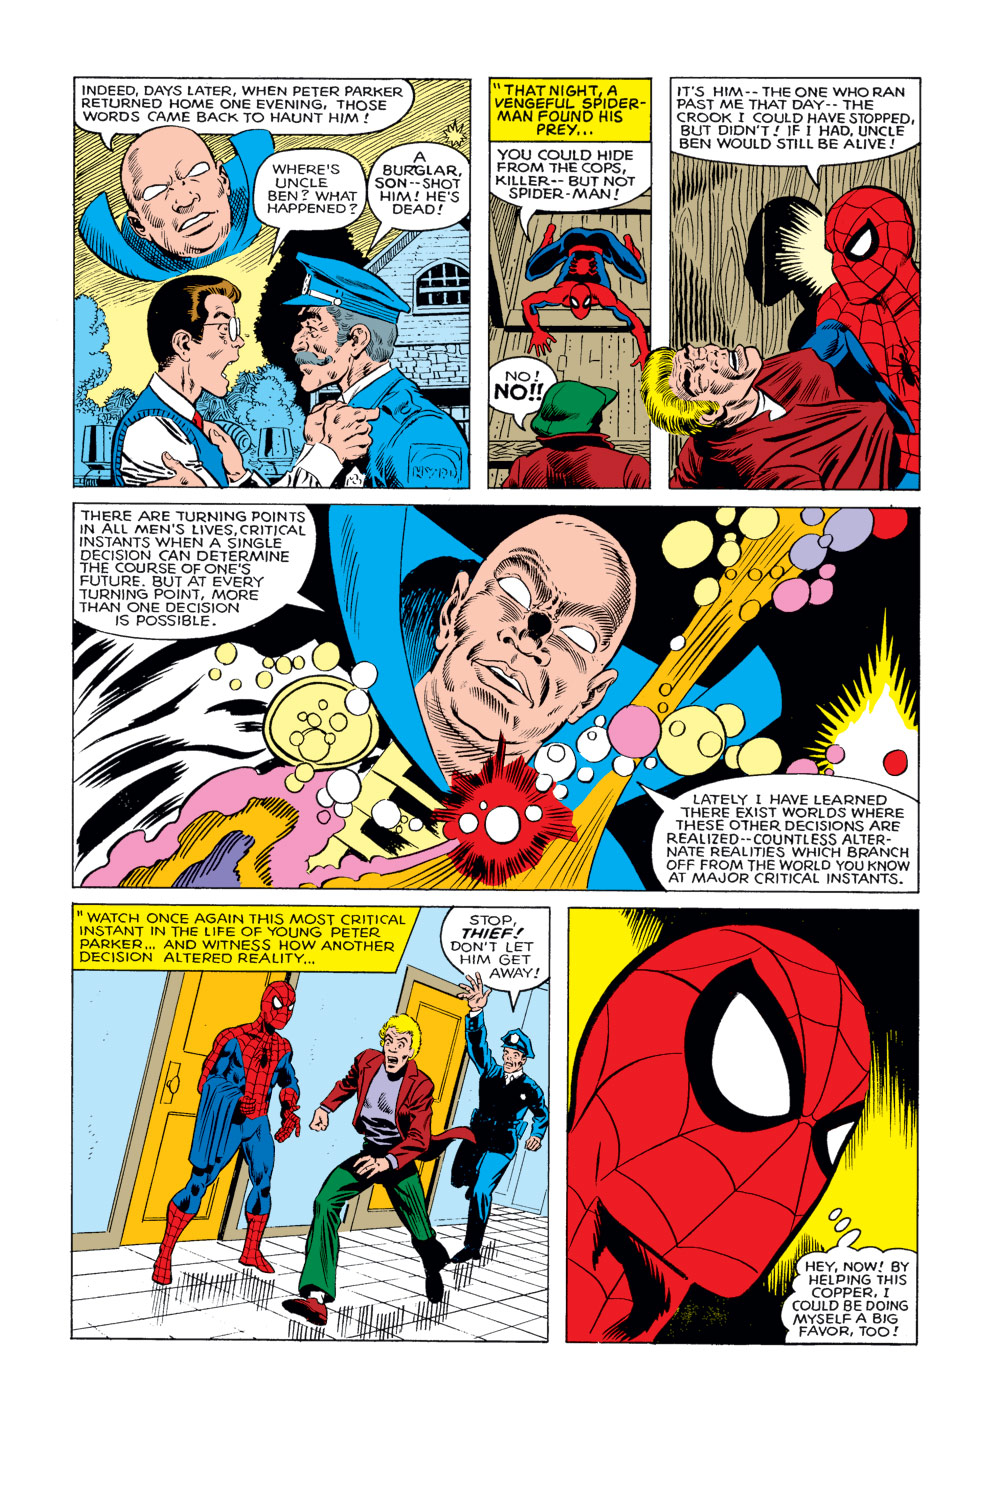 What If? (1977) issue 19 - Spider-Man had never become a crimefighter - Page 4